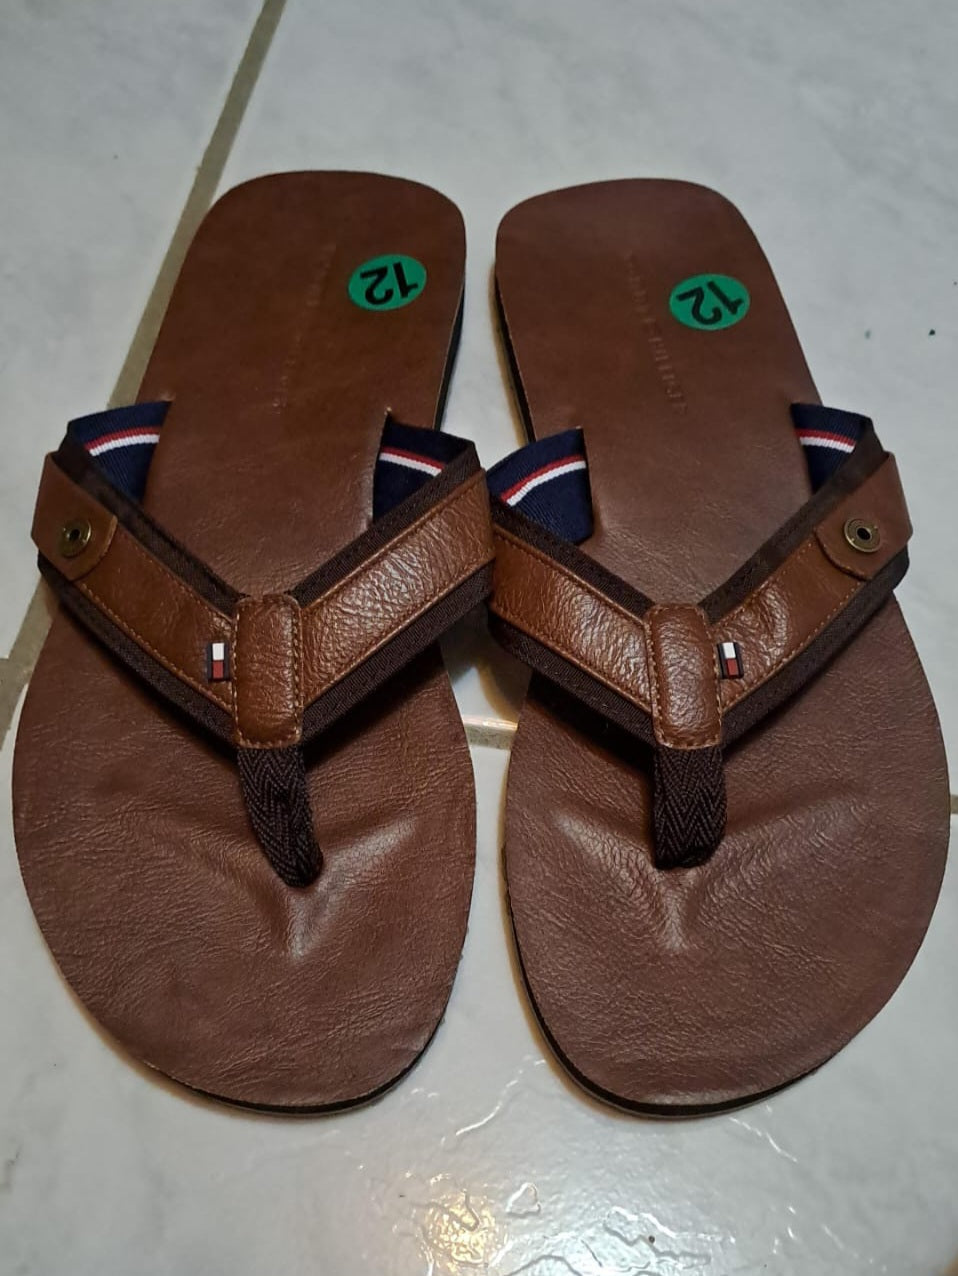 Tommy Hilfiger Slippers (Size 12)